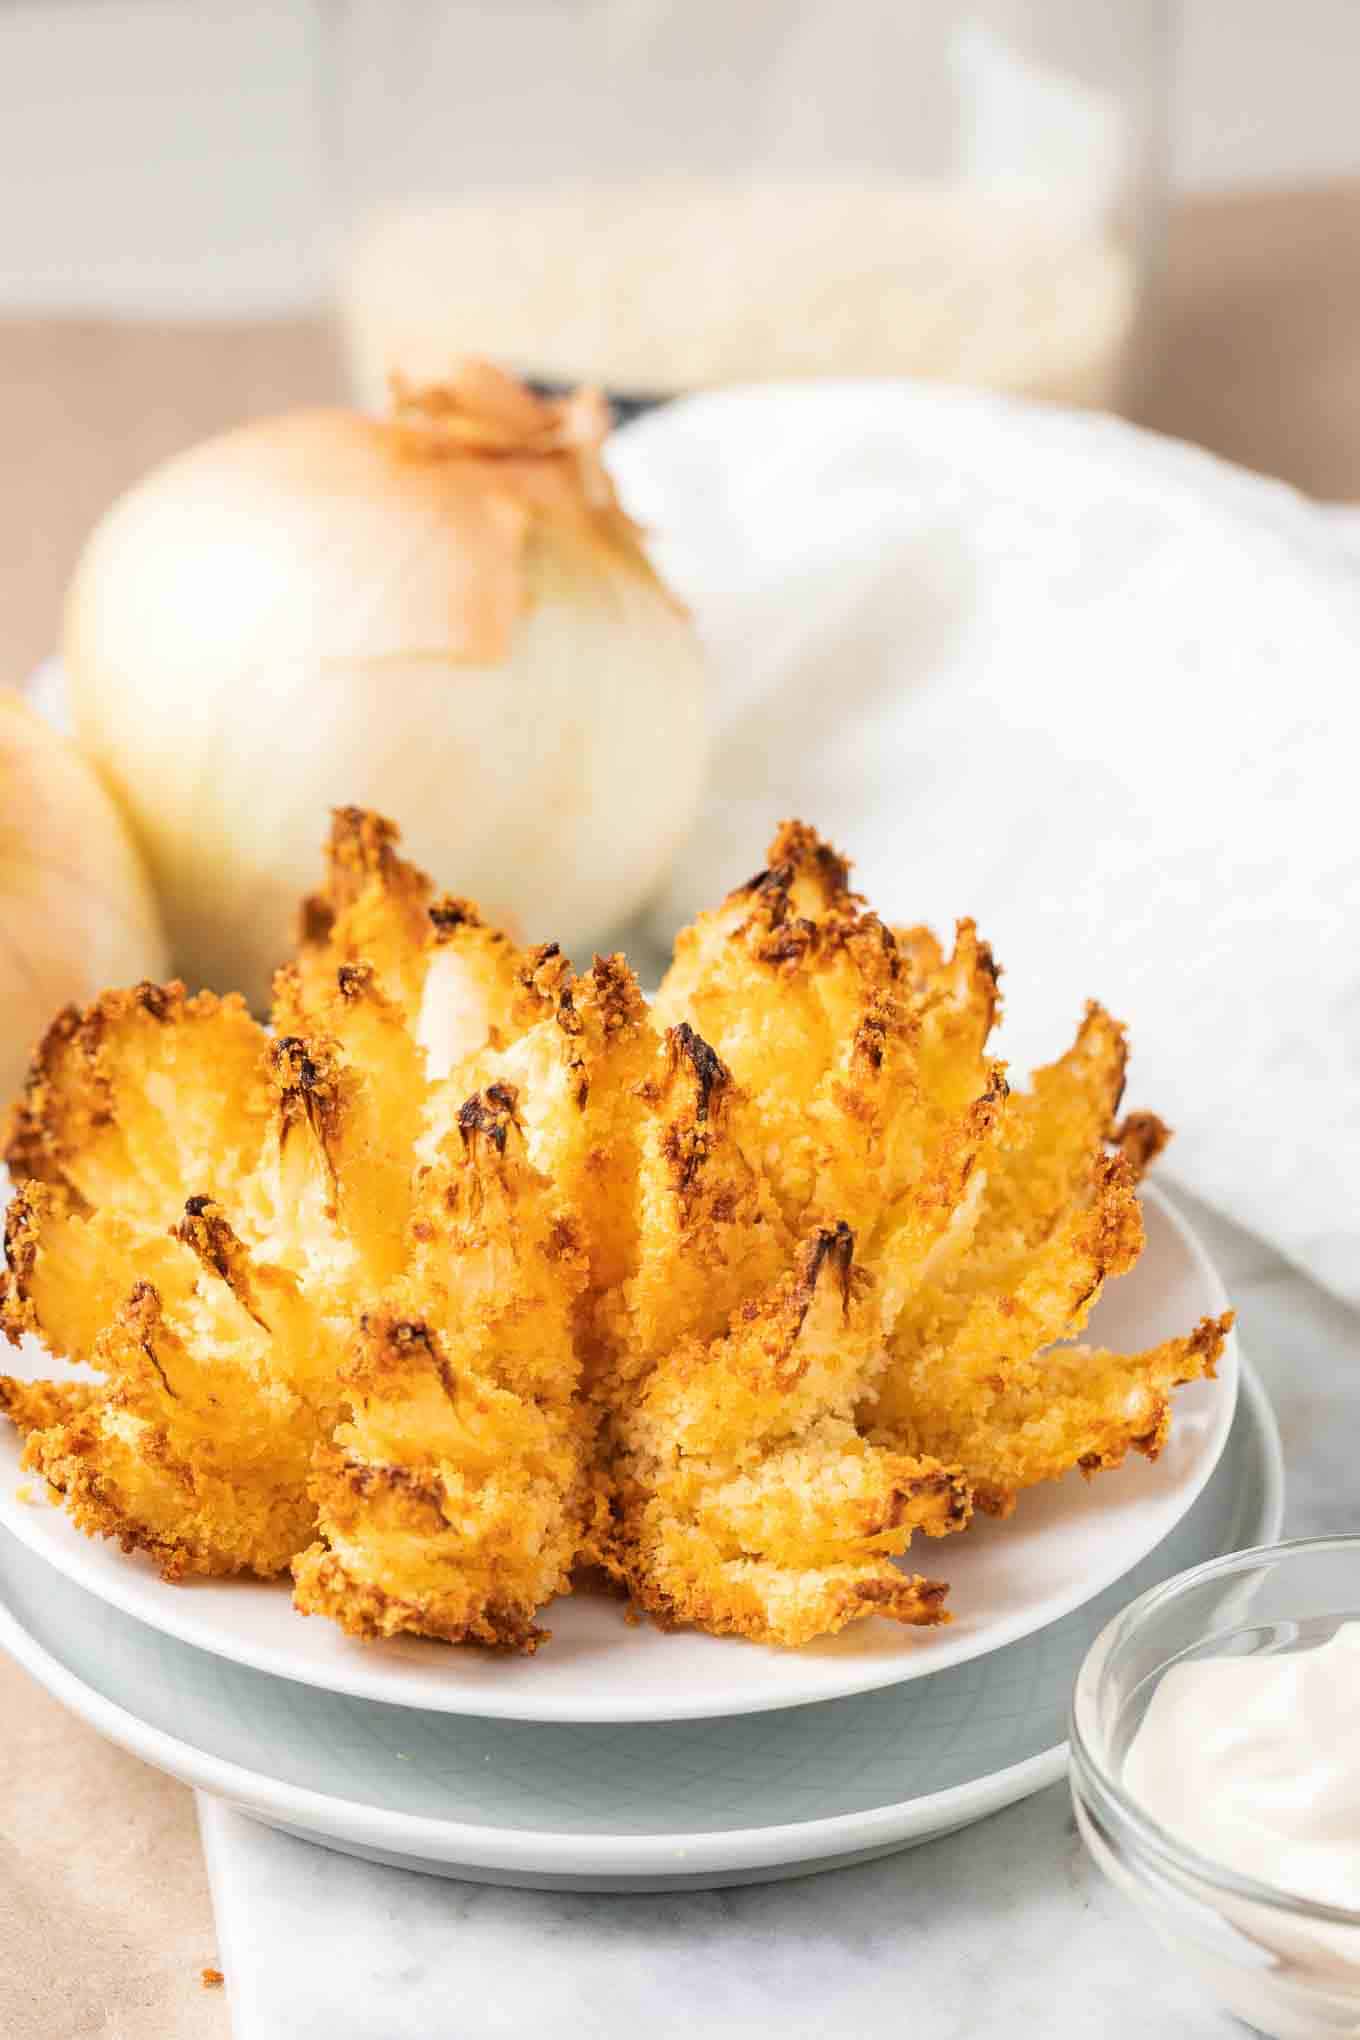 https://platedcravings.com/wp-content/uploads/2019/02/Air-Fryer-Blooming-Onion-Plated-Cravings-4.jpg